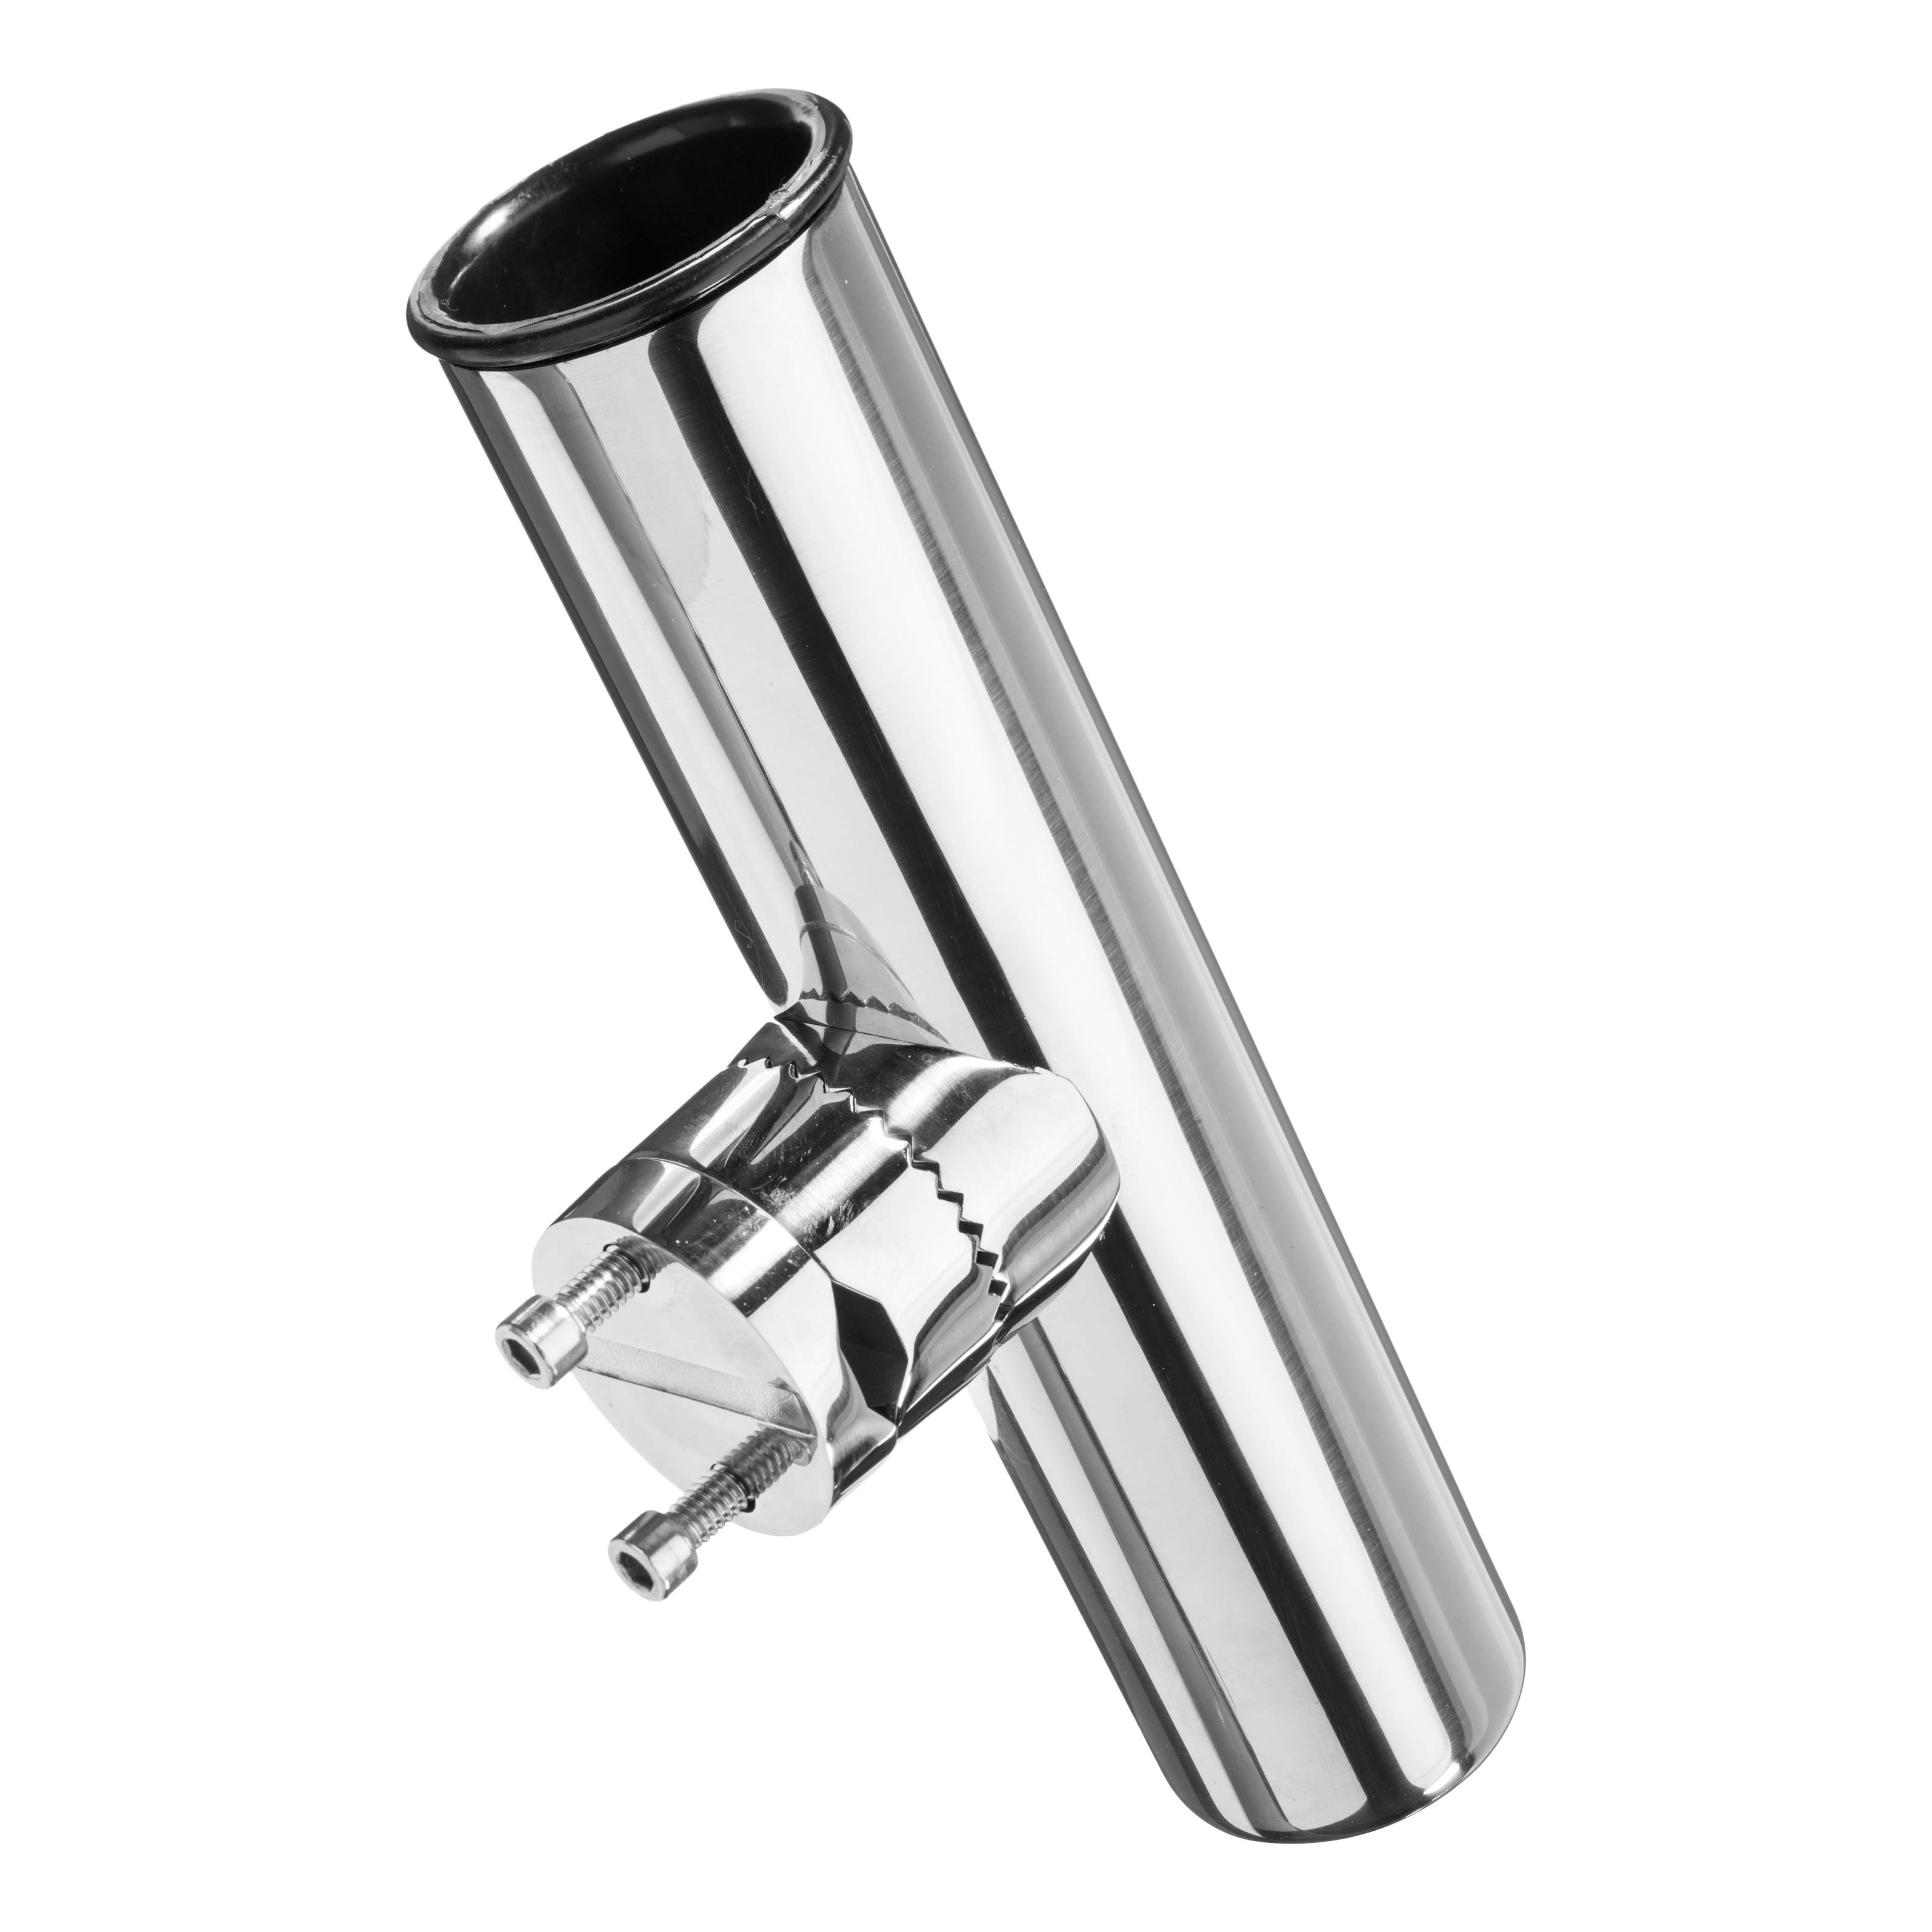 Stainless Steel Clamp on Fishing Rod Holder for Rails 7/8 to 1 Tube